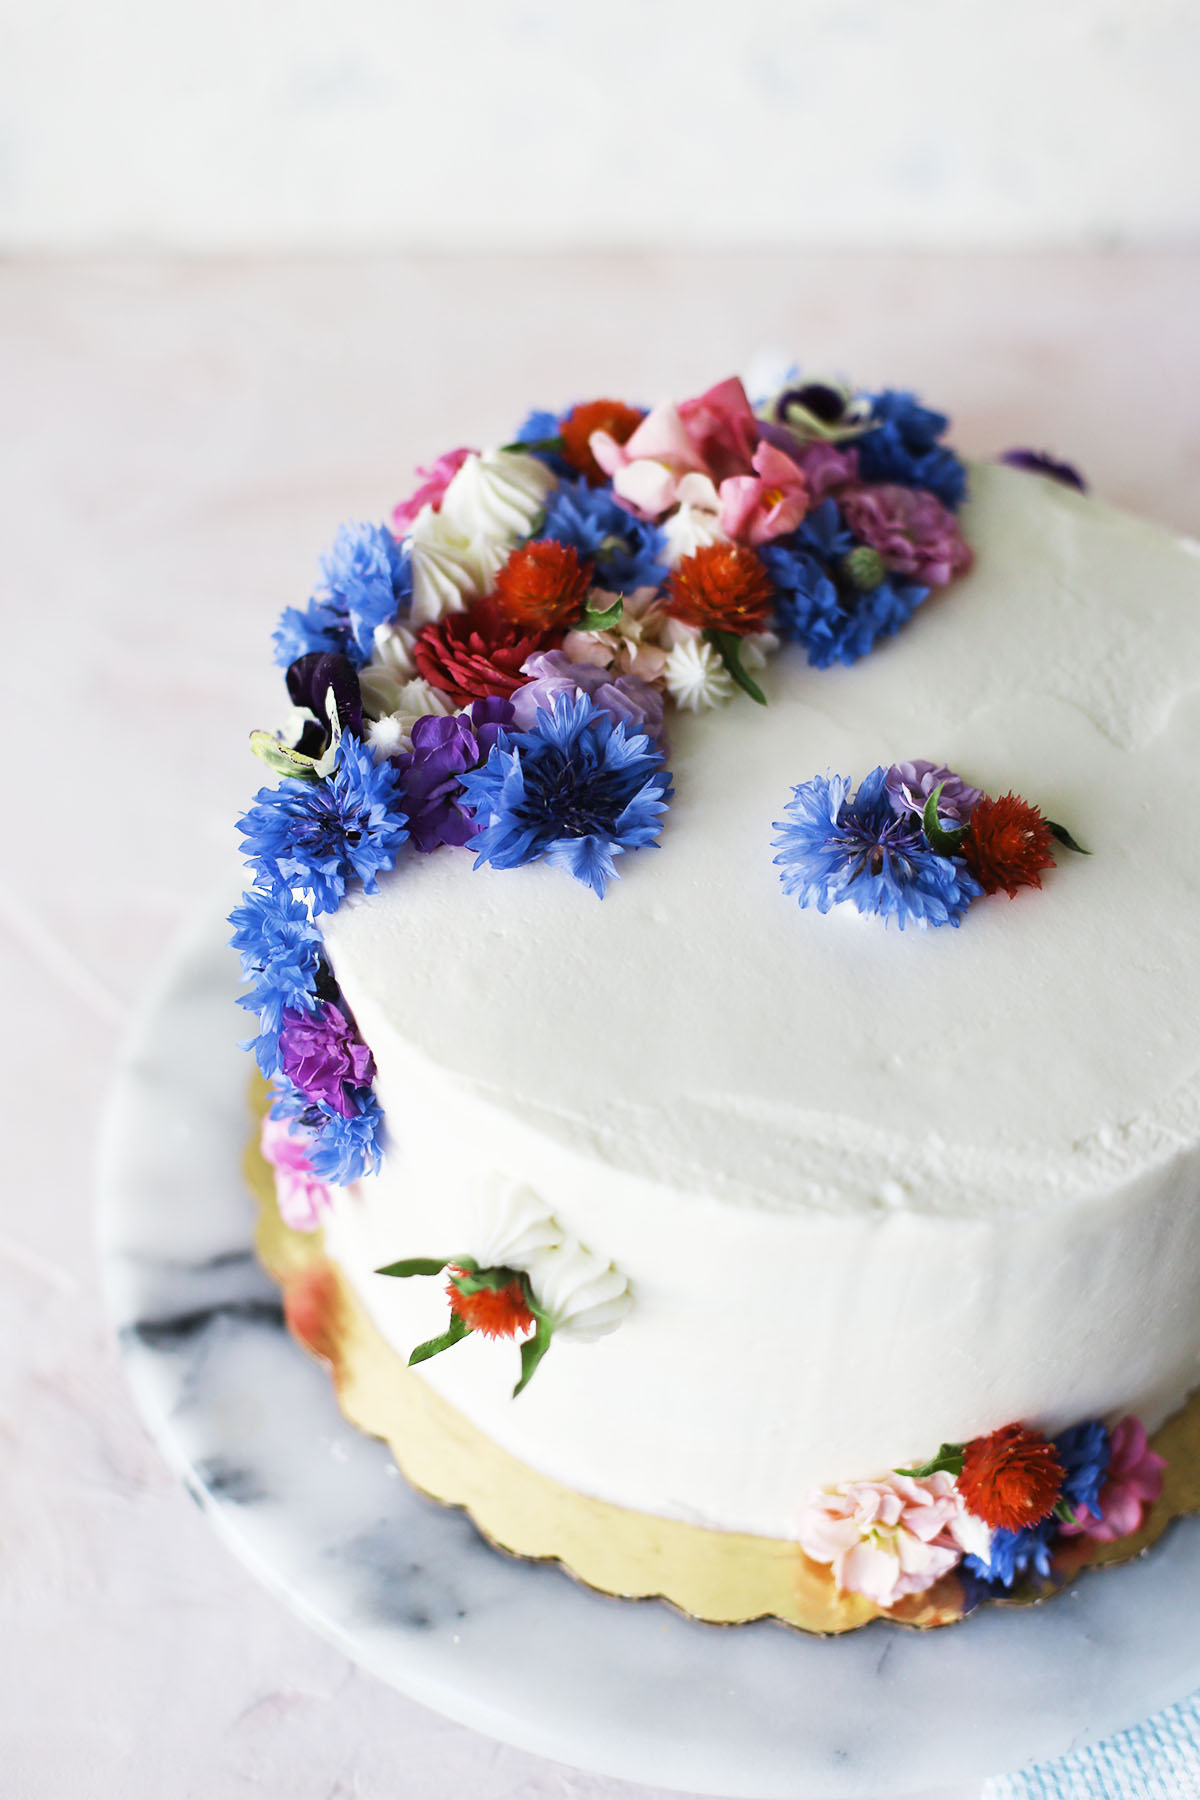 How To Decorate A Cake With Flowers